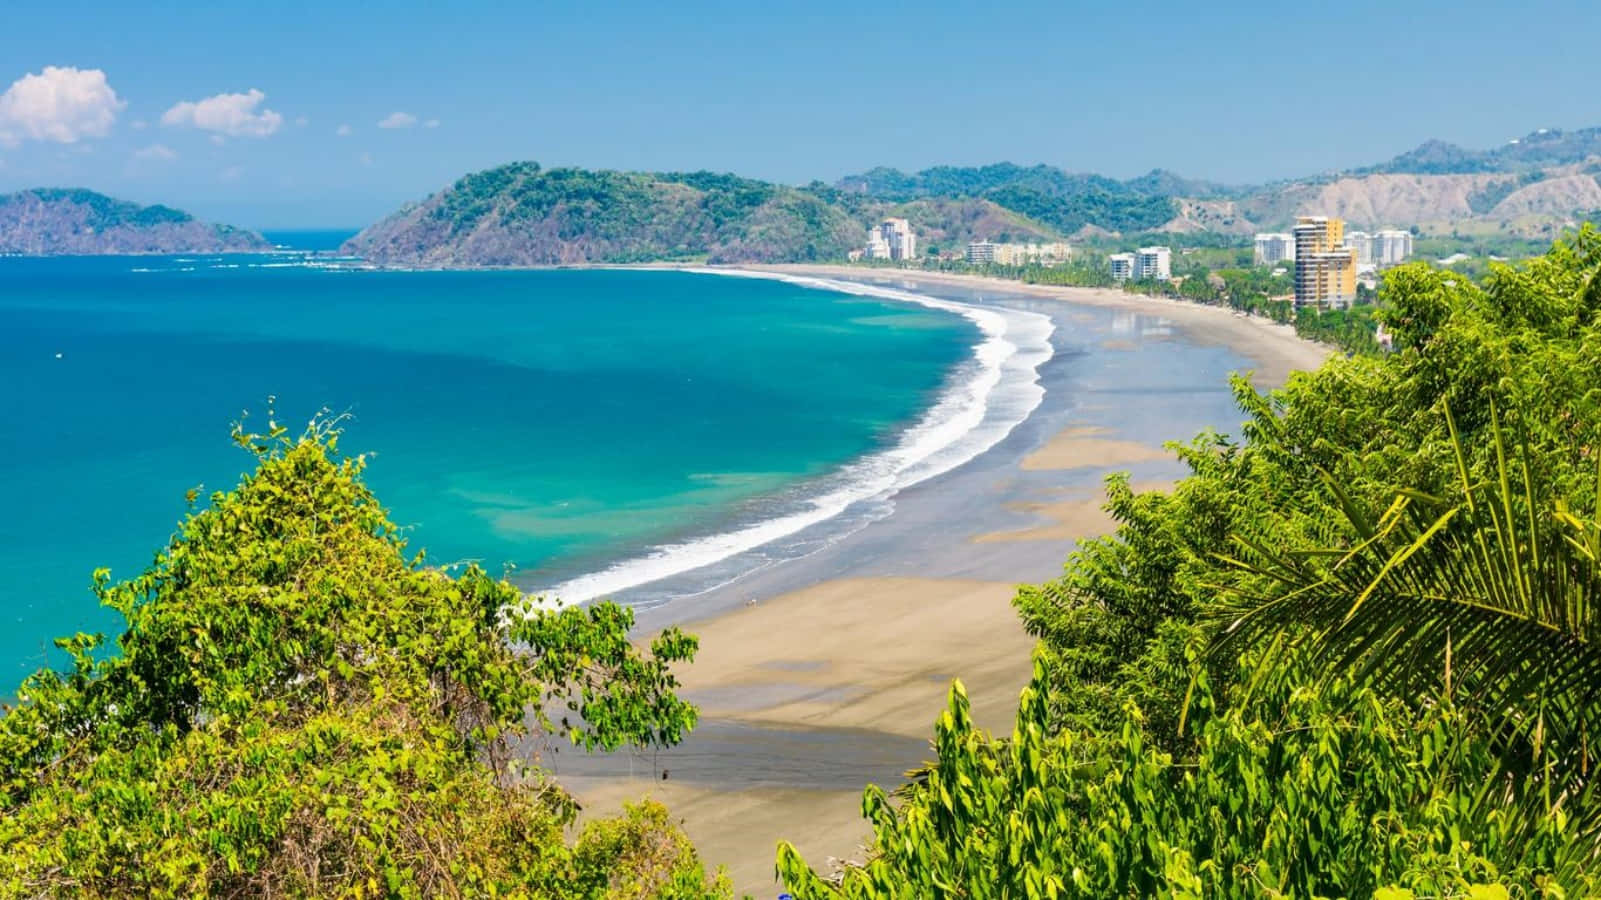 Enjoy a vacation in paradise in beautiful Costa Rica